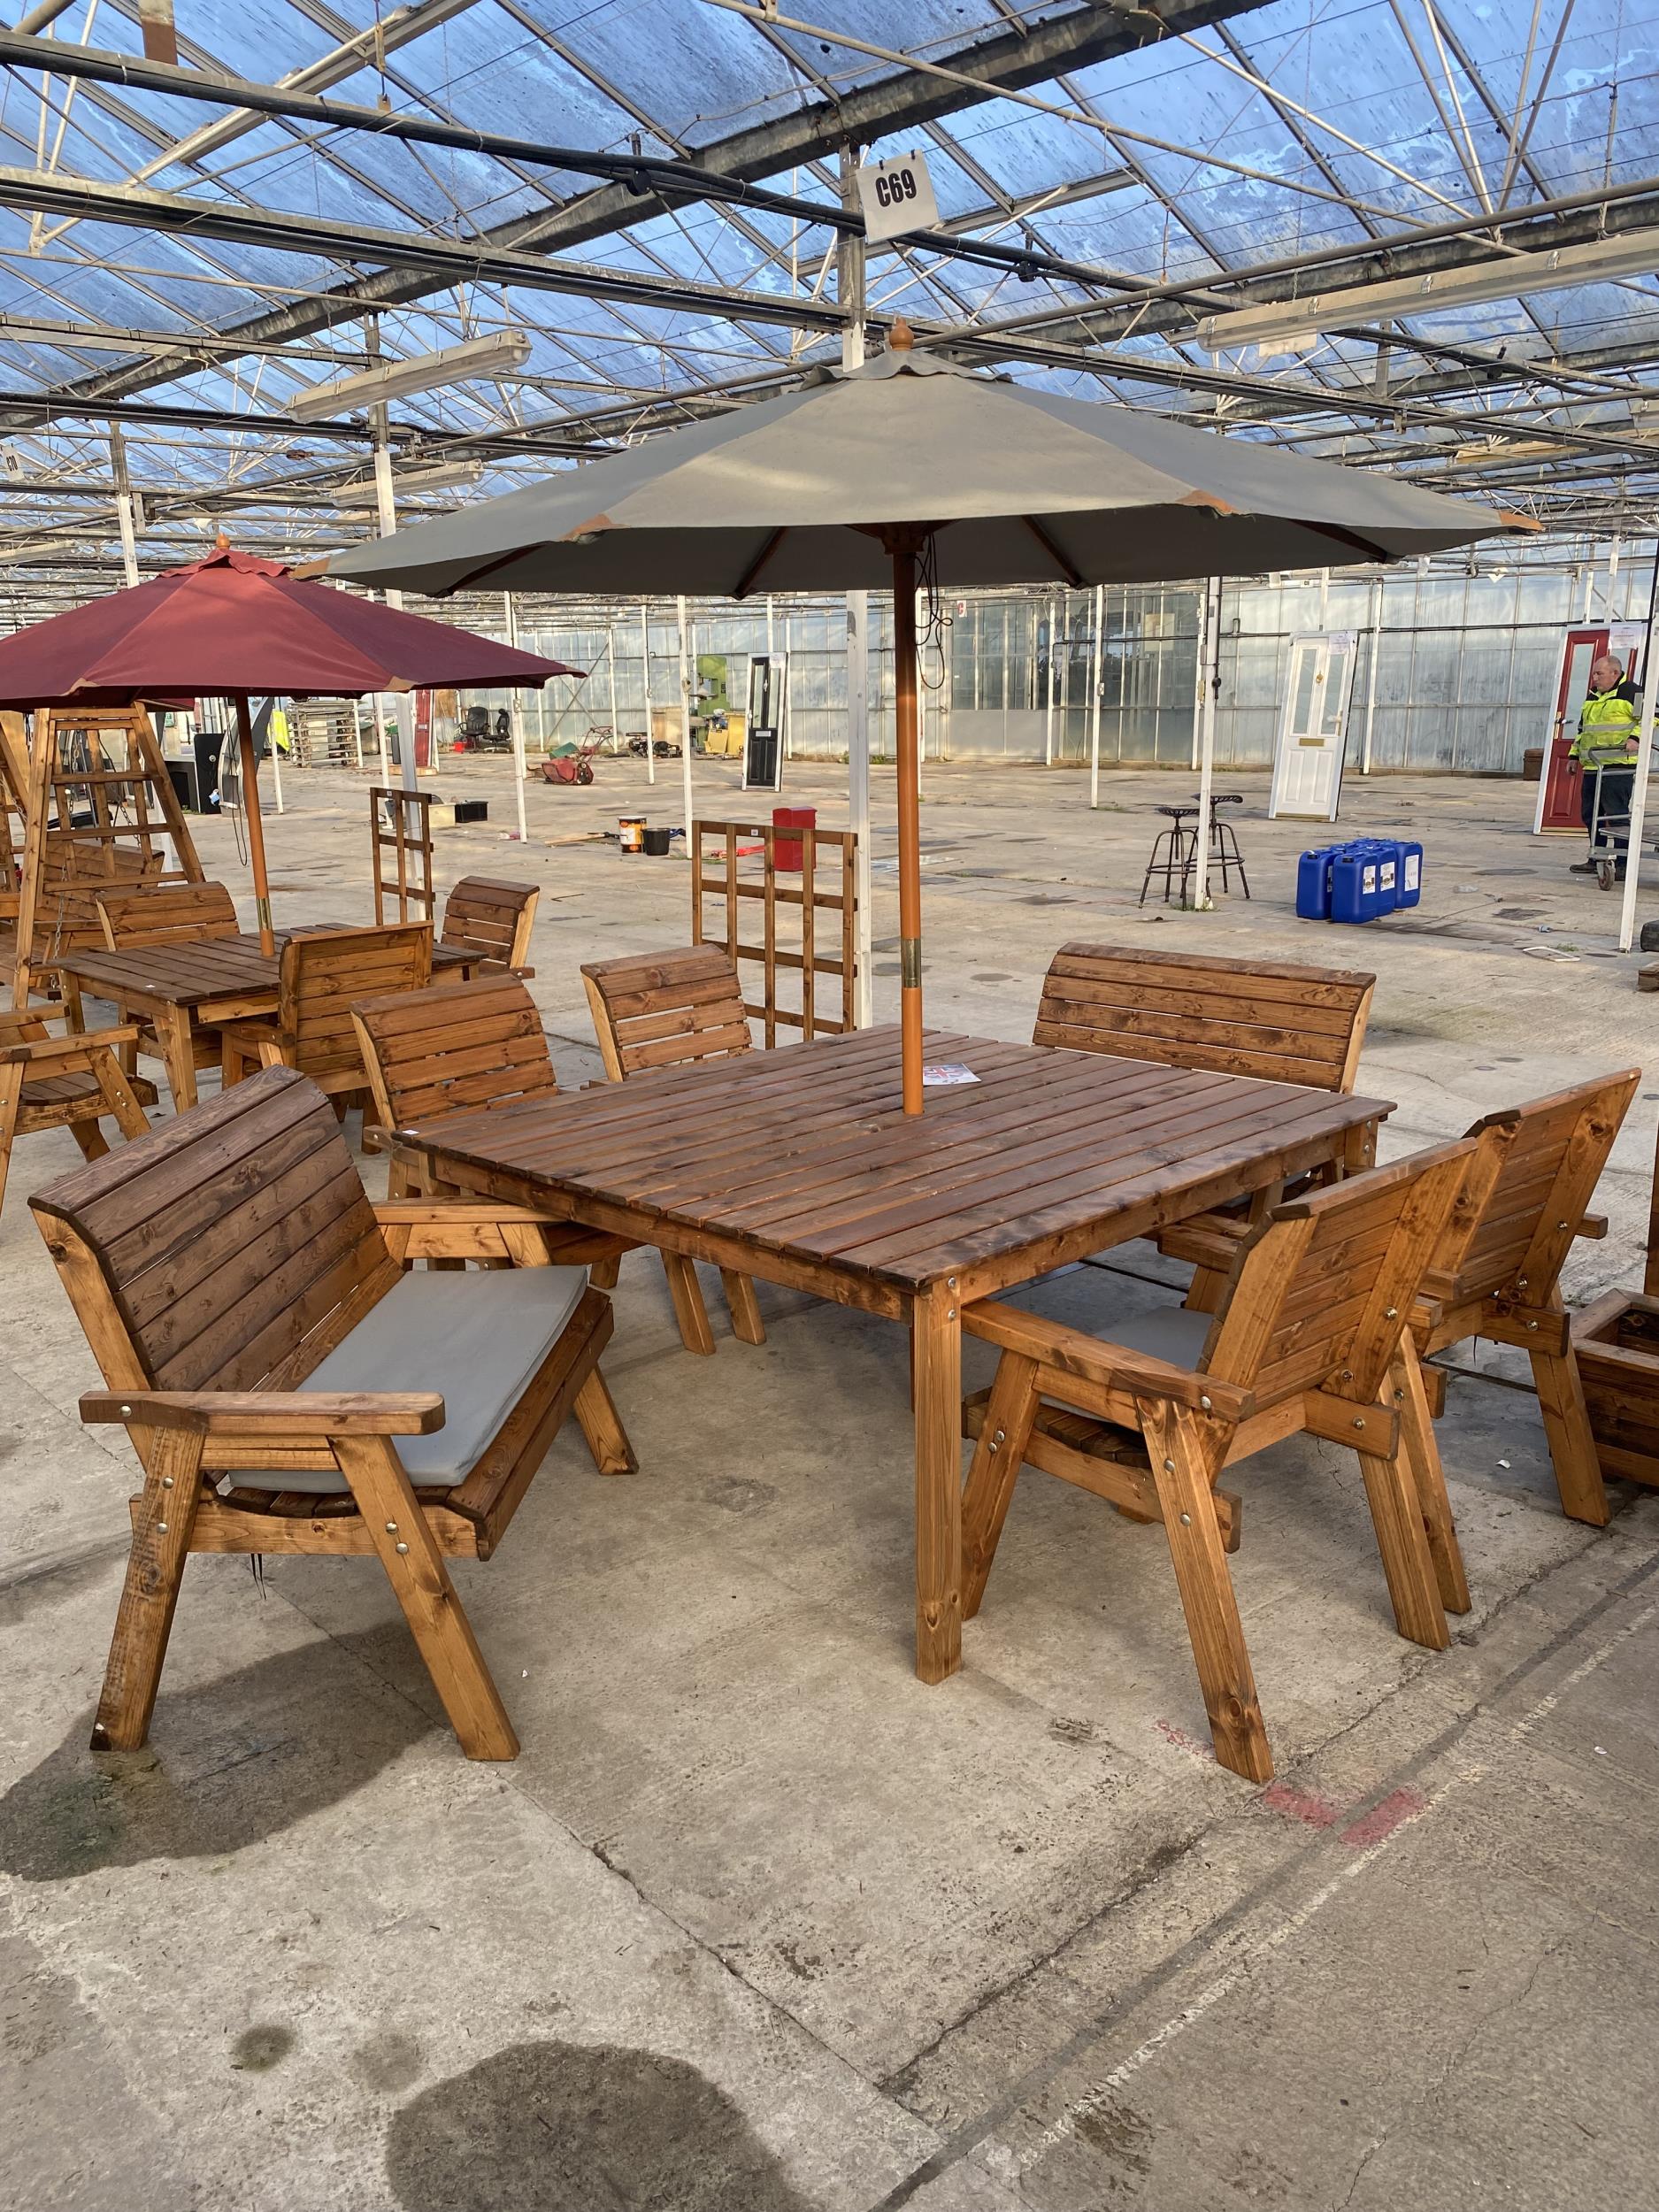 AN AS NEW EX DISPLAY CHARLES TAYLOR PATIO FURNITURE SET COMPRISING OF A LARGE SQUARE TABLE, FOUR - Image 5 of 5